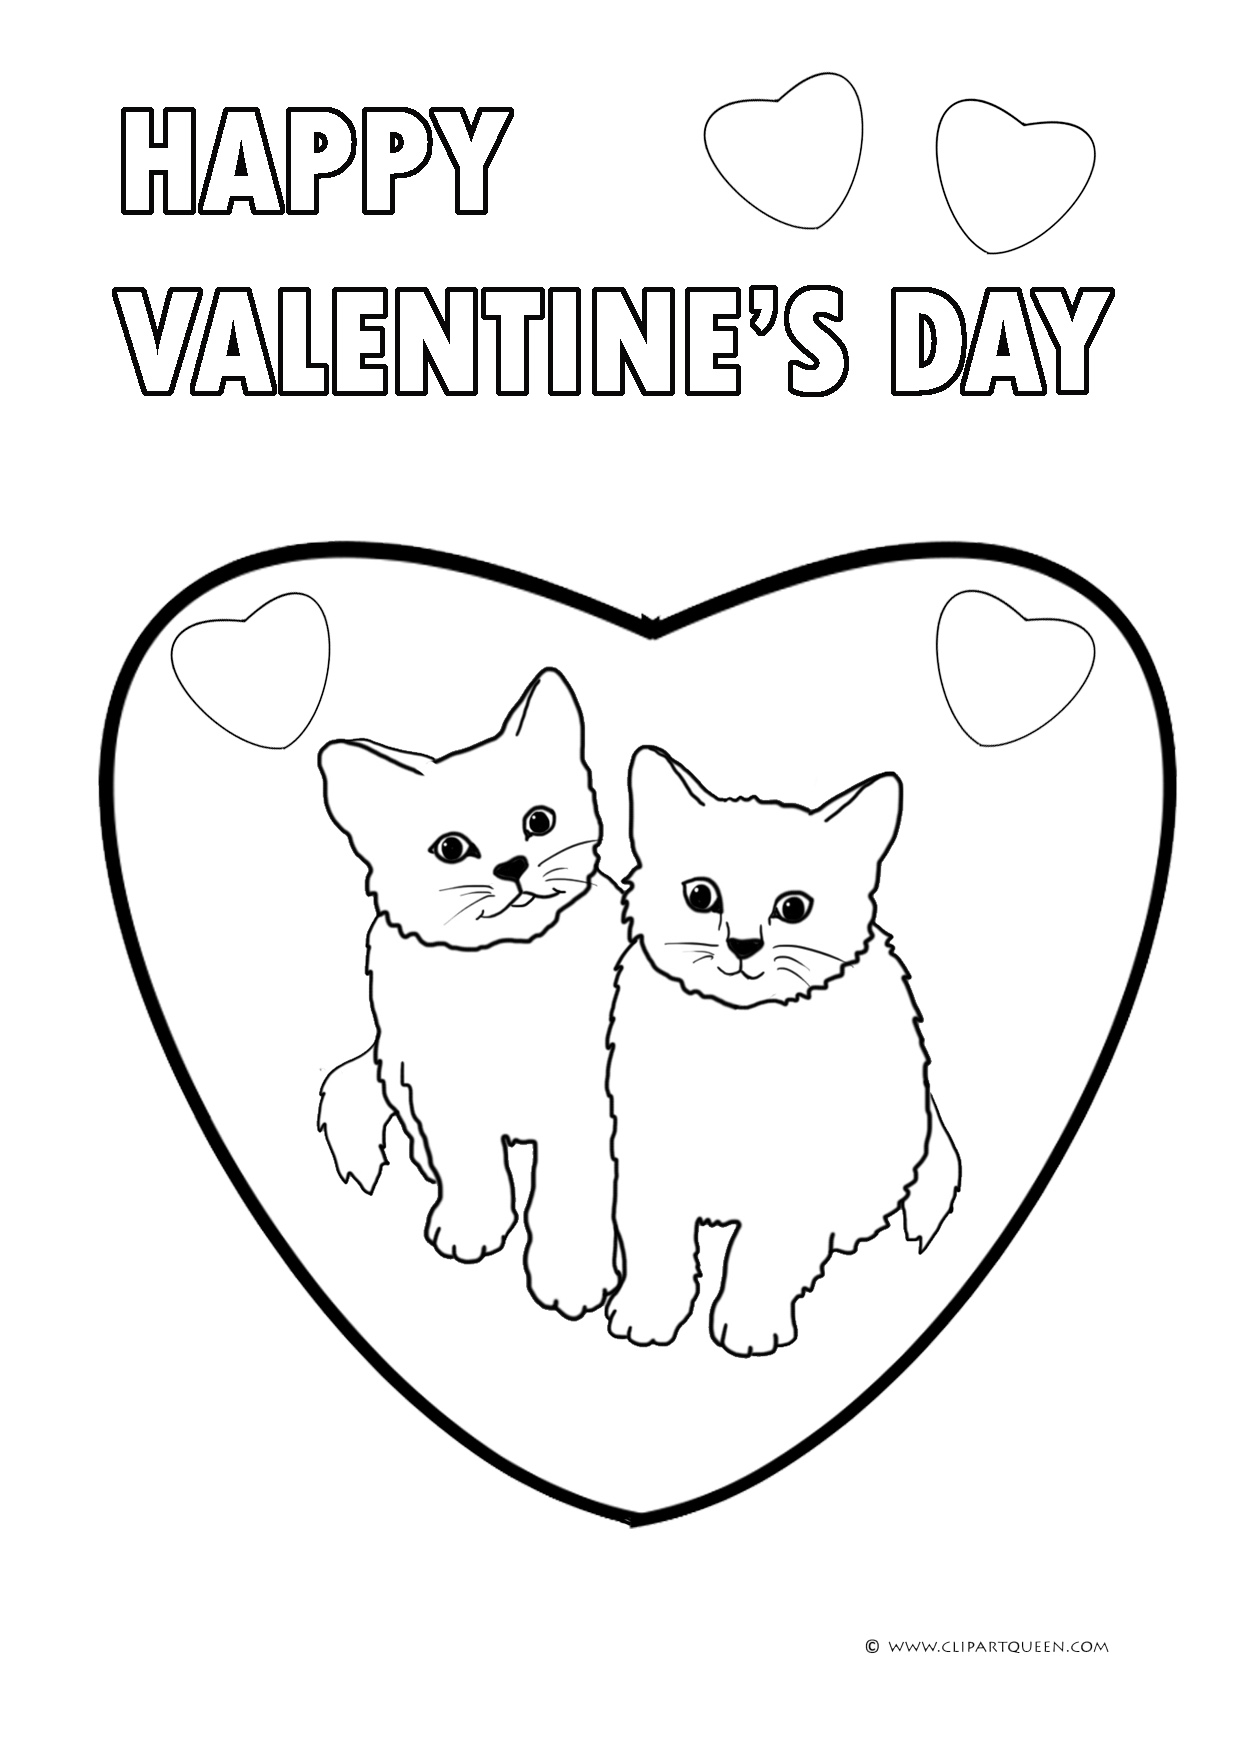 free-valentine-printables-cards-games-flowers-boxes-more